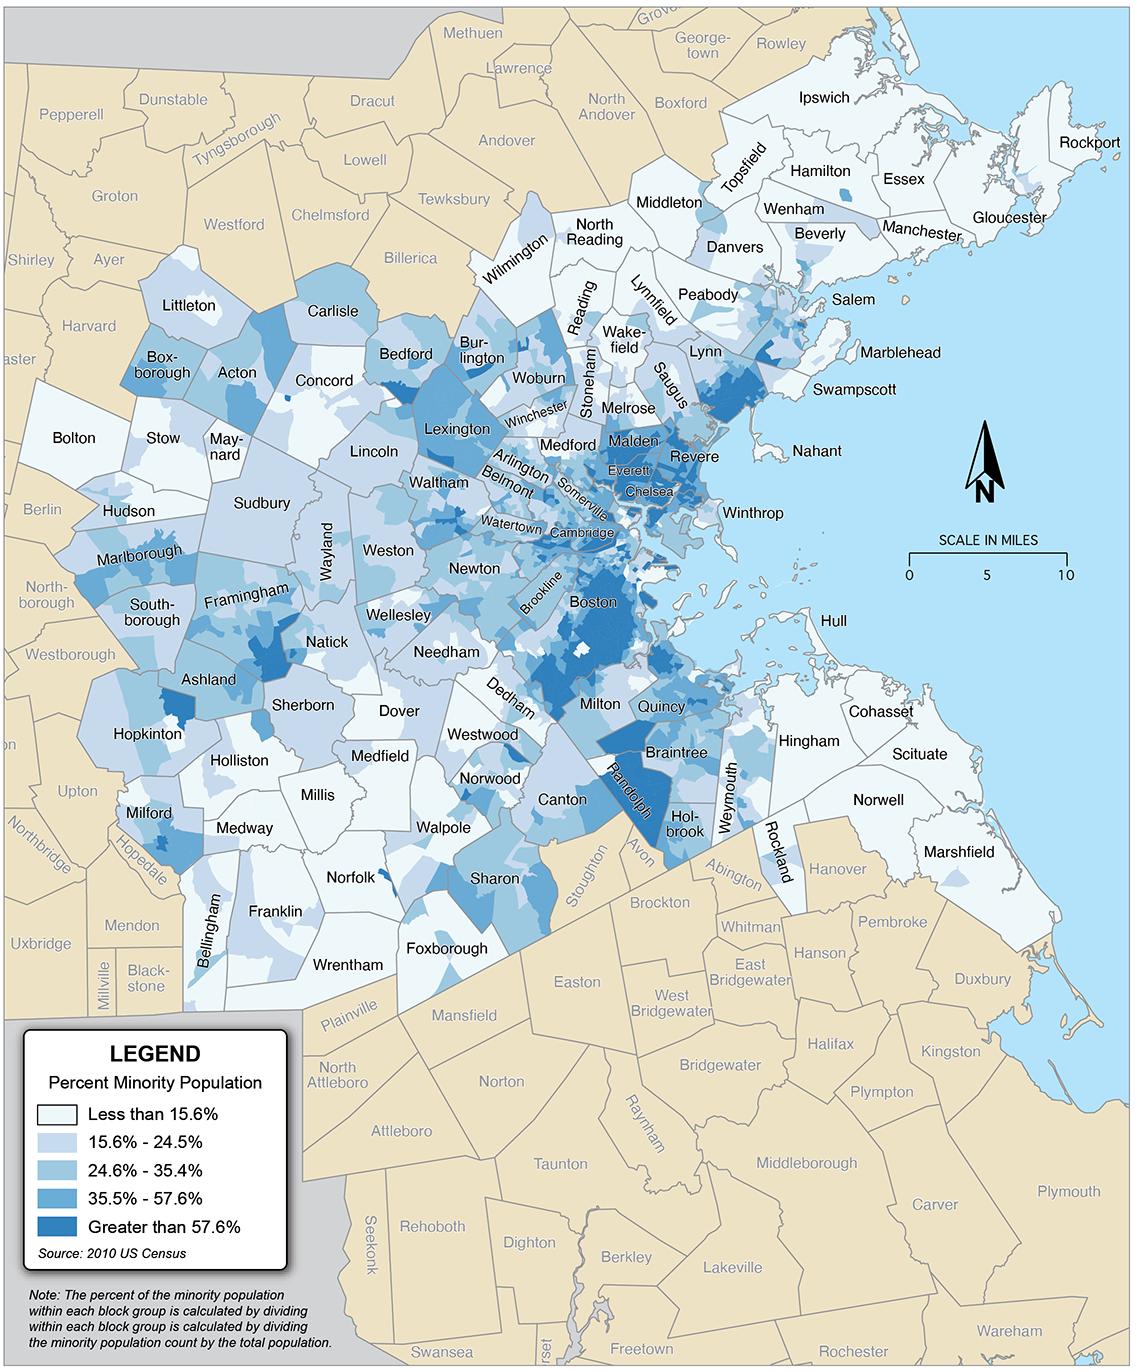 Figure 6-2 is a map showing the percent of the population that identifies as a minority in each block group across the 97 communities in the Boston region.